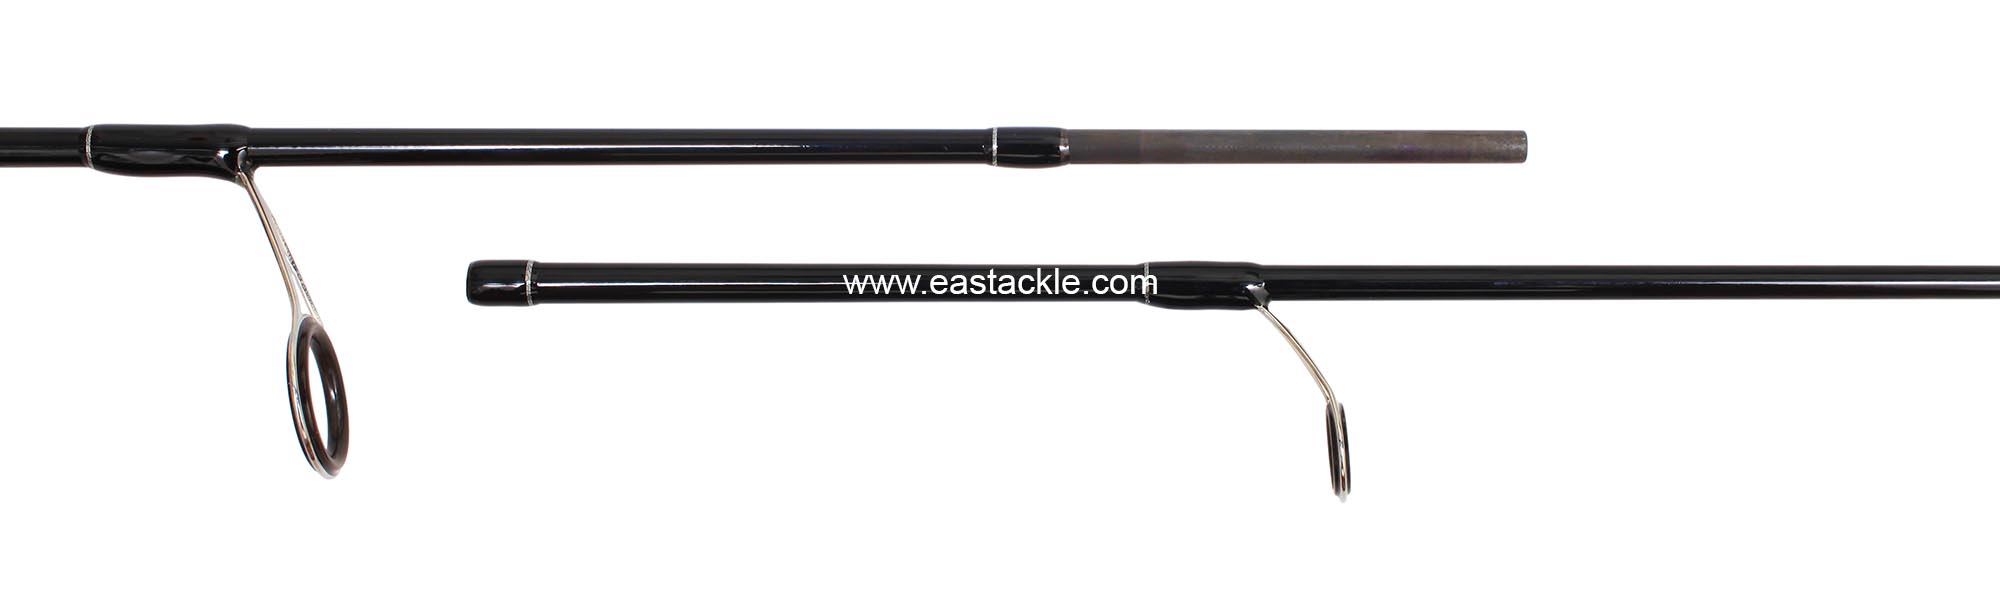 Rapala - Vallemo - VMS632M - Spinning Rod - Joint Section (Side View) | Eastackle